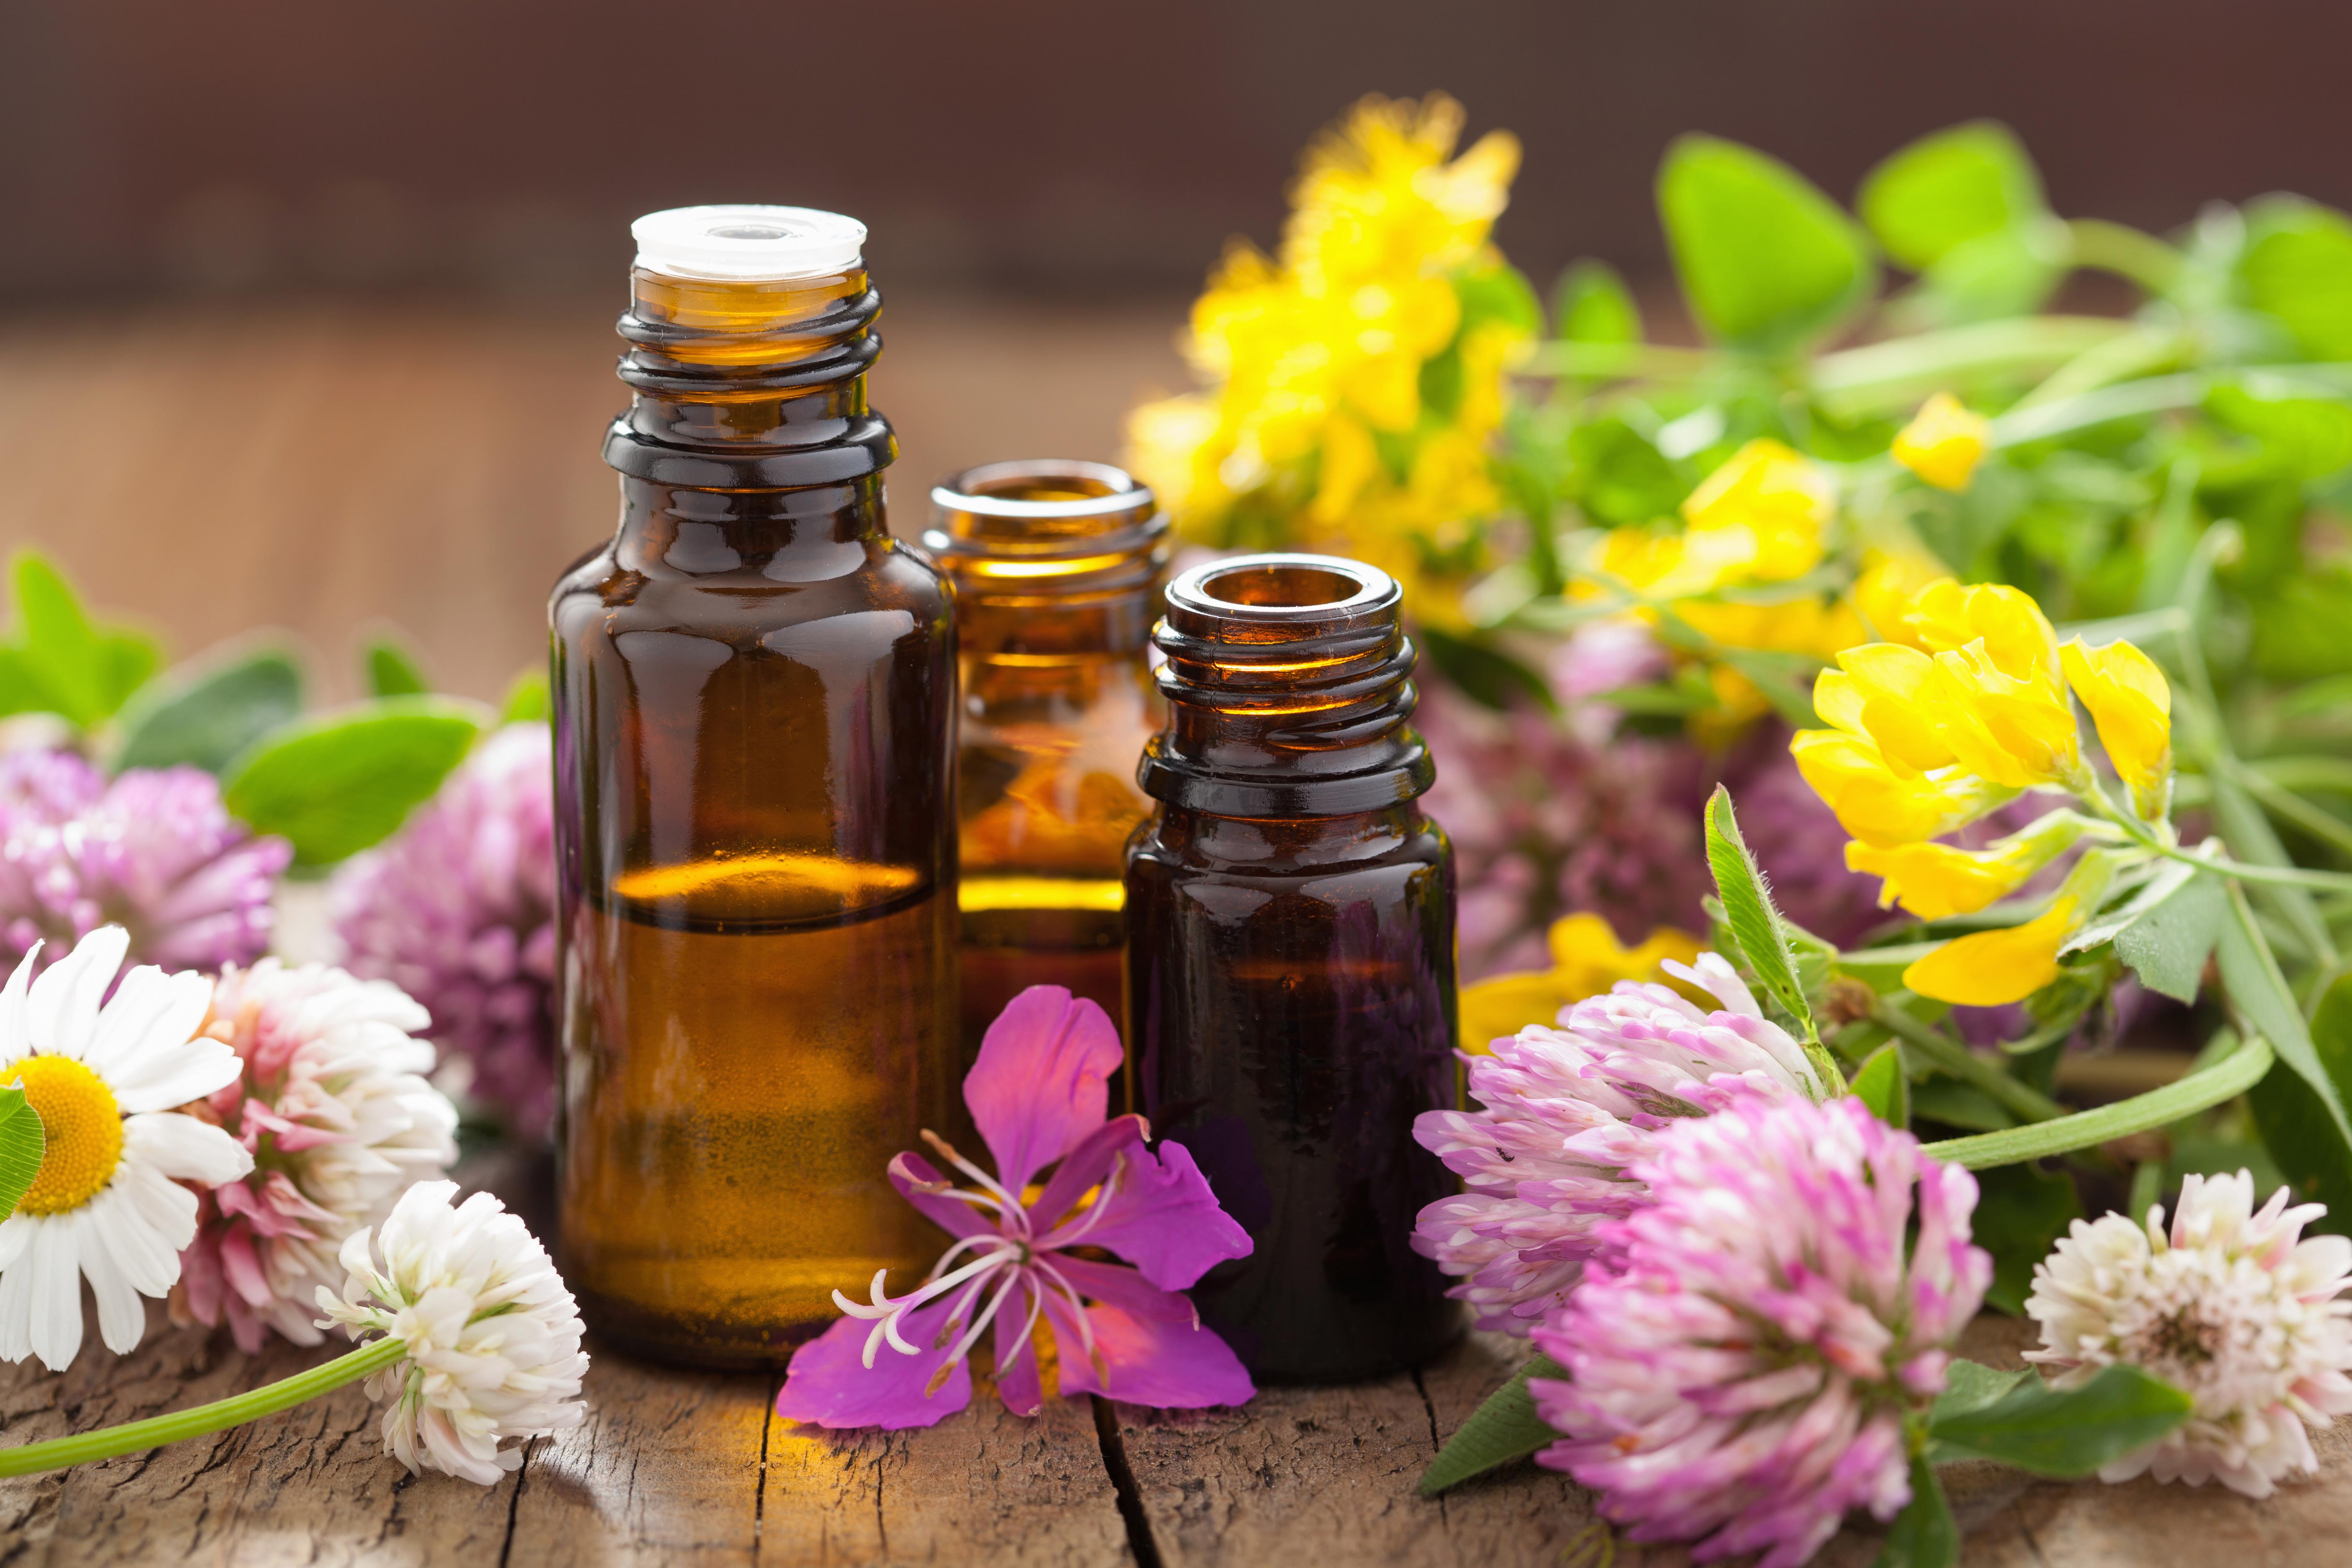 Getting Started with Essential Oils - The Rocks